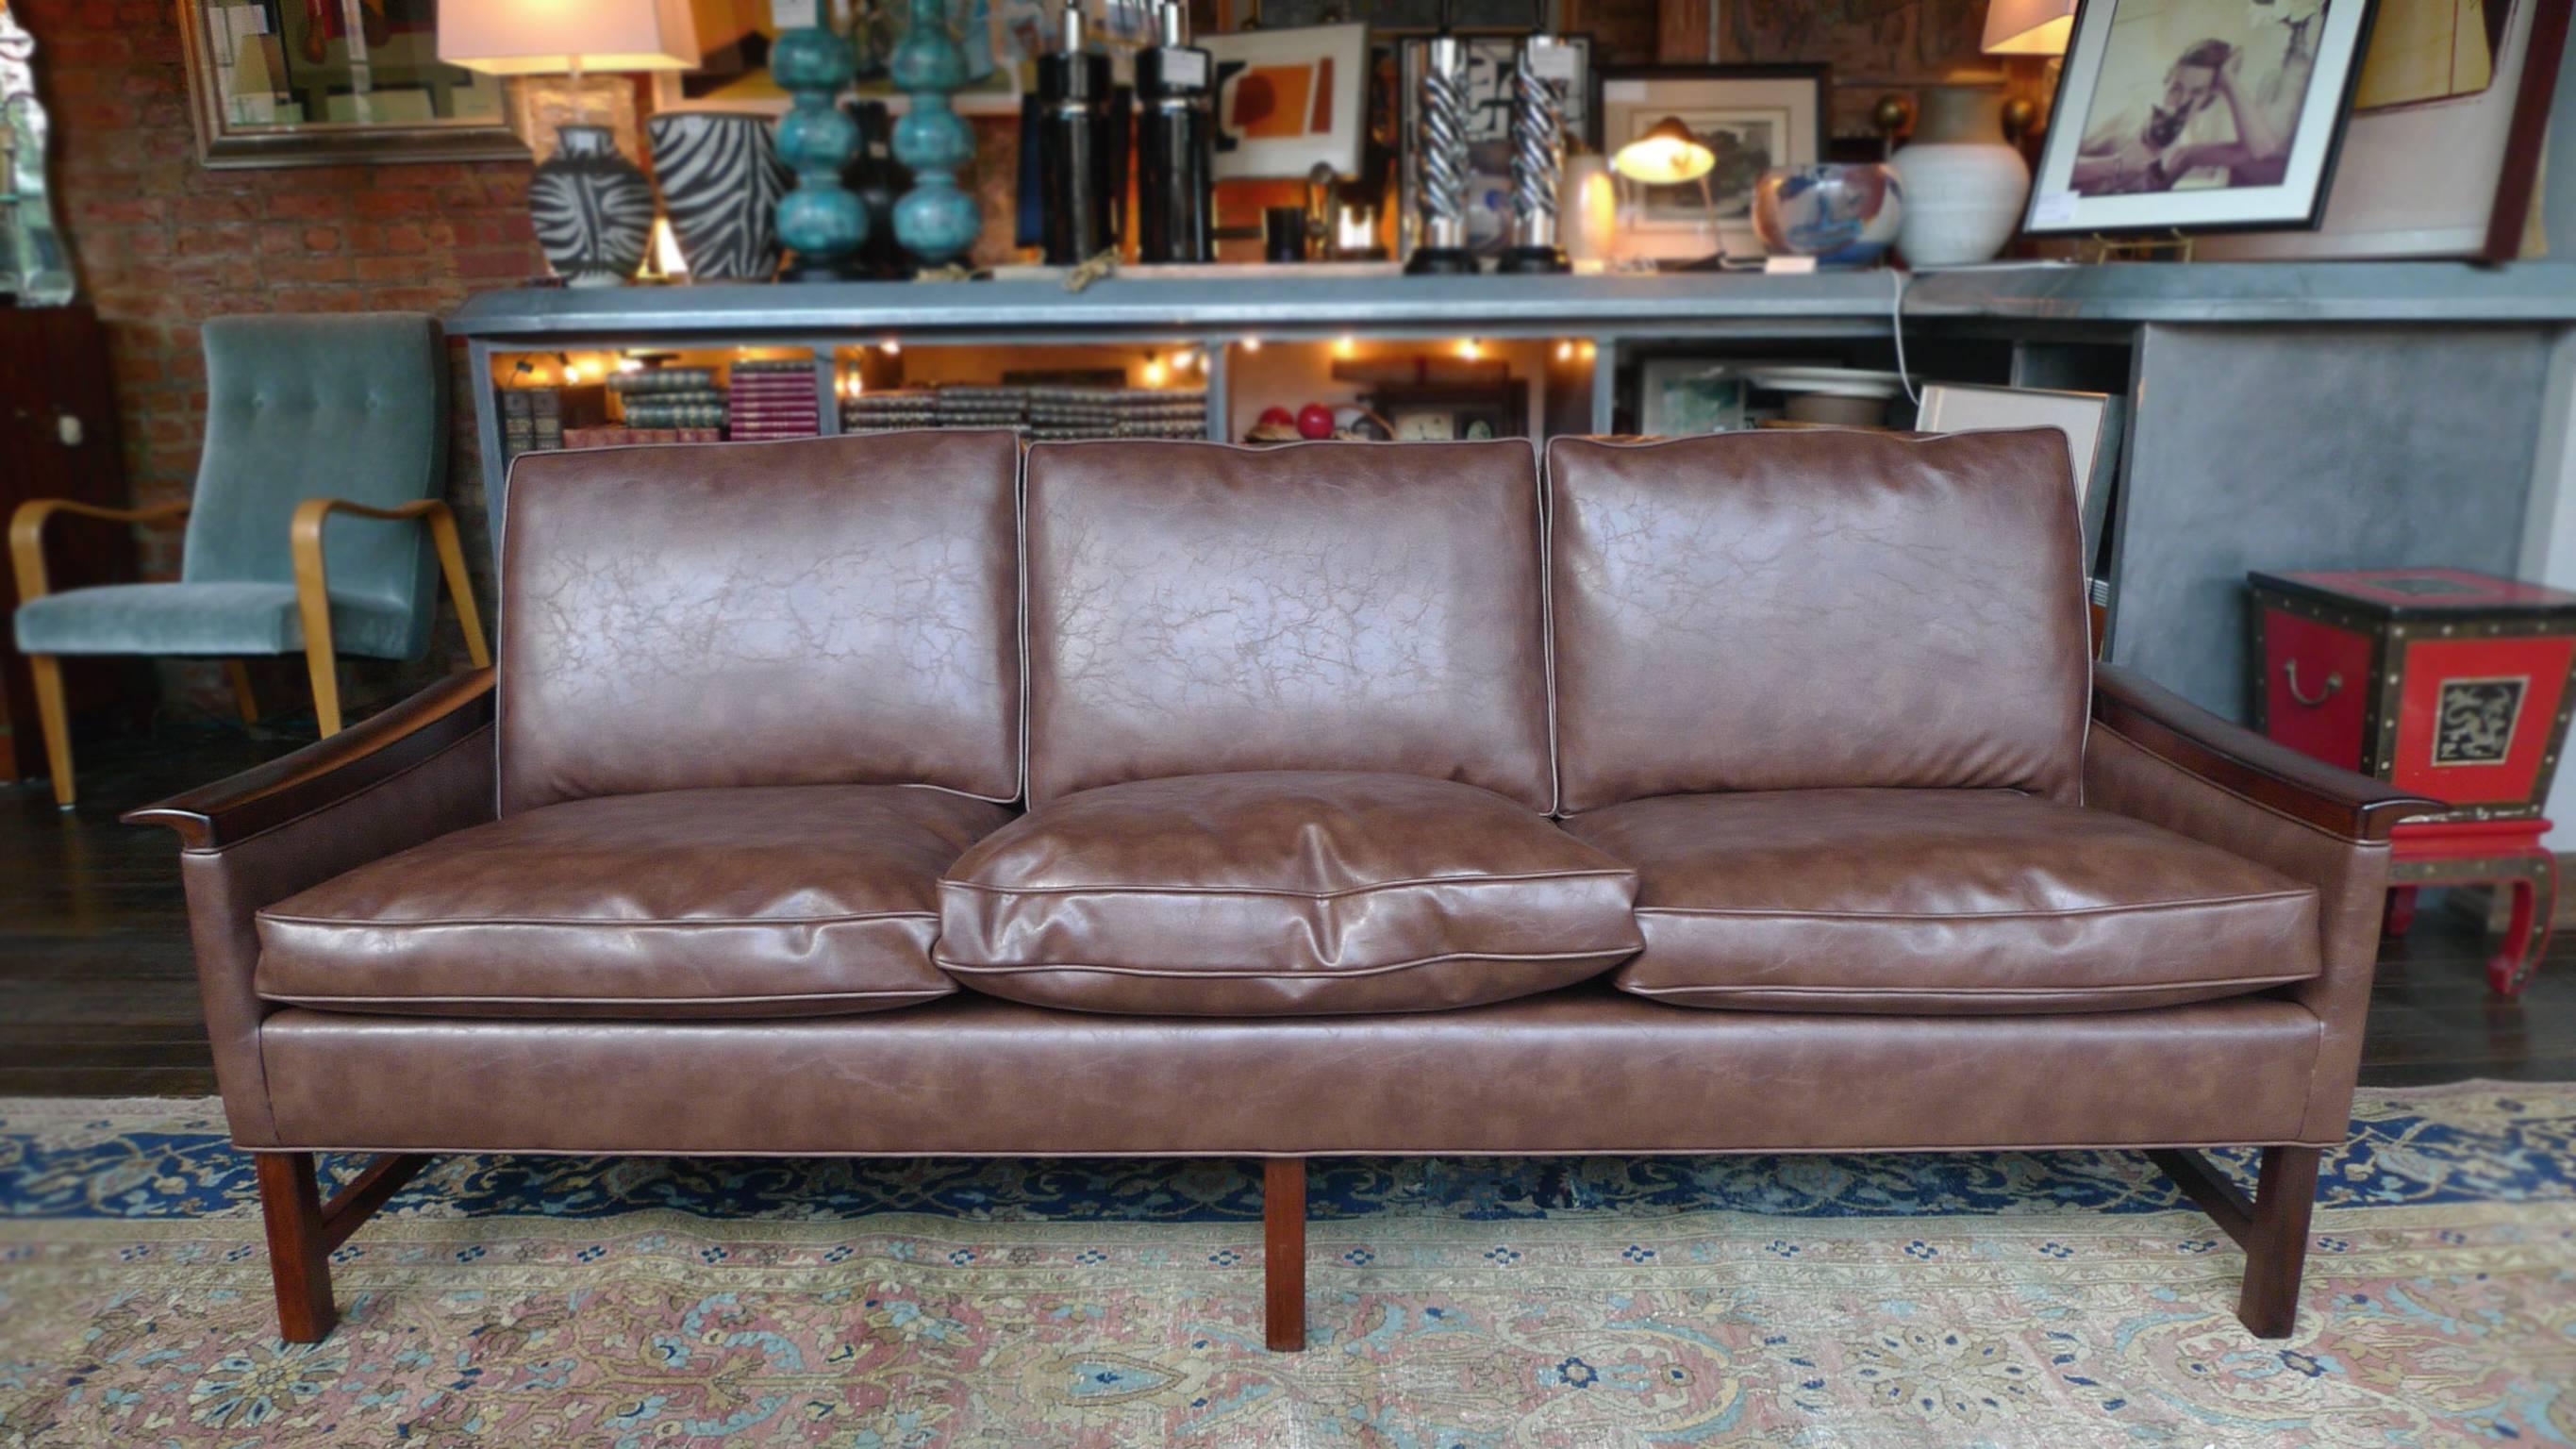 This Swedish sofa was designed and manufactured by Bröderna Anderssons. It's comprised of rosewood frame and legs that have been newly refinished. The sofa is reupholstered in a beautiful brown faux leather. The three-seat cushions are new as well.